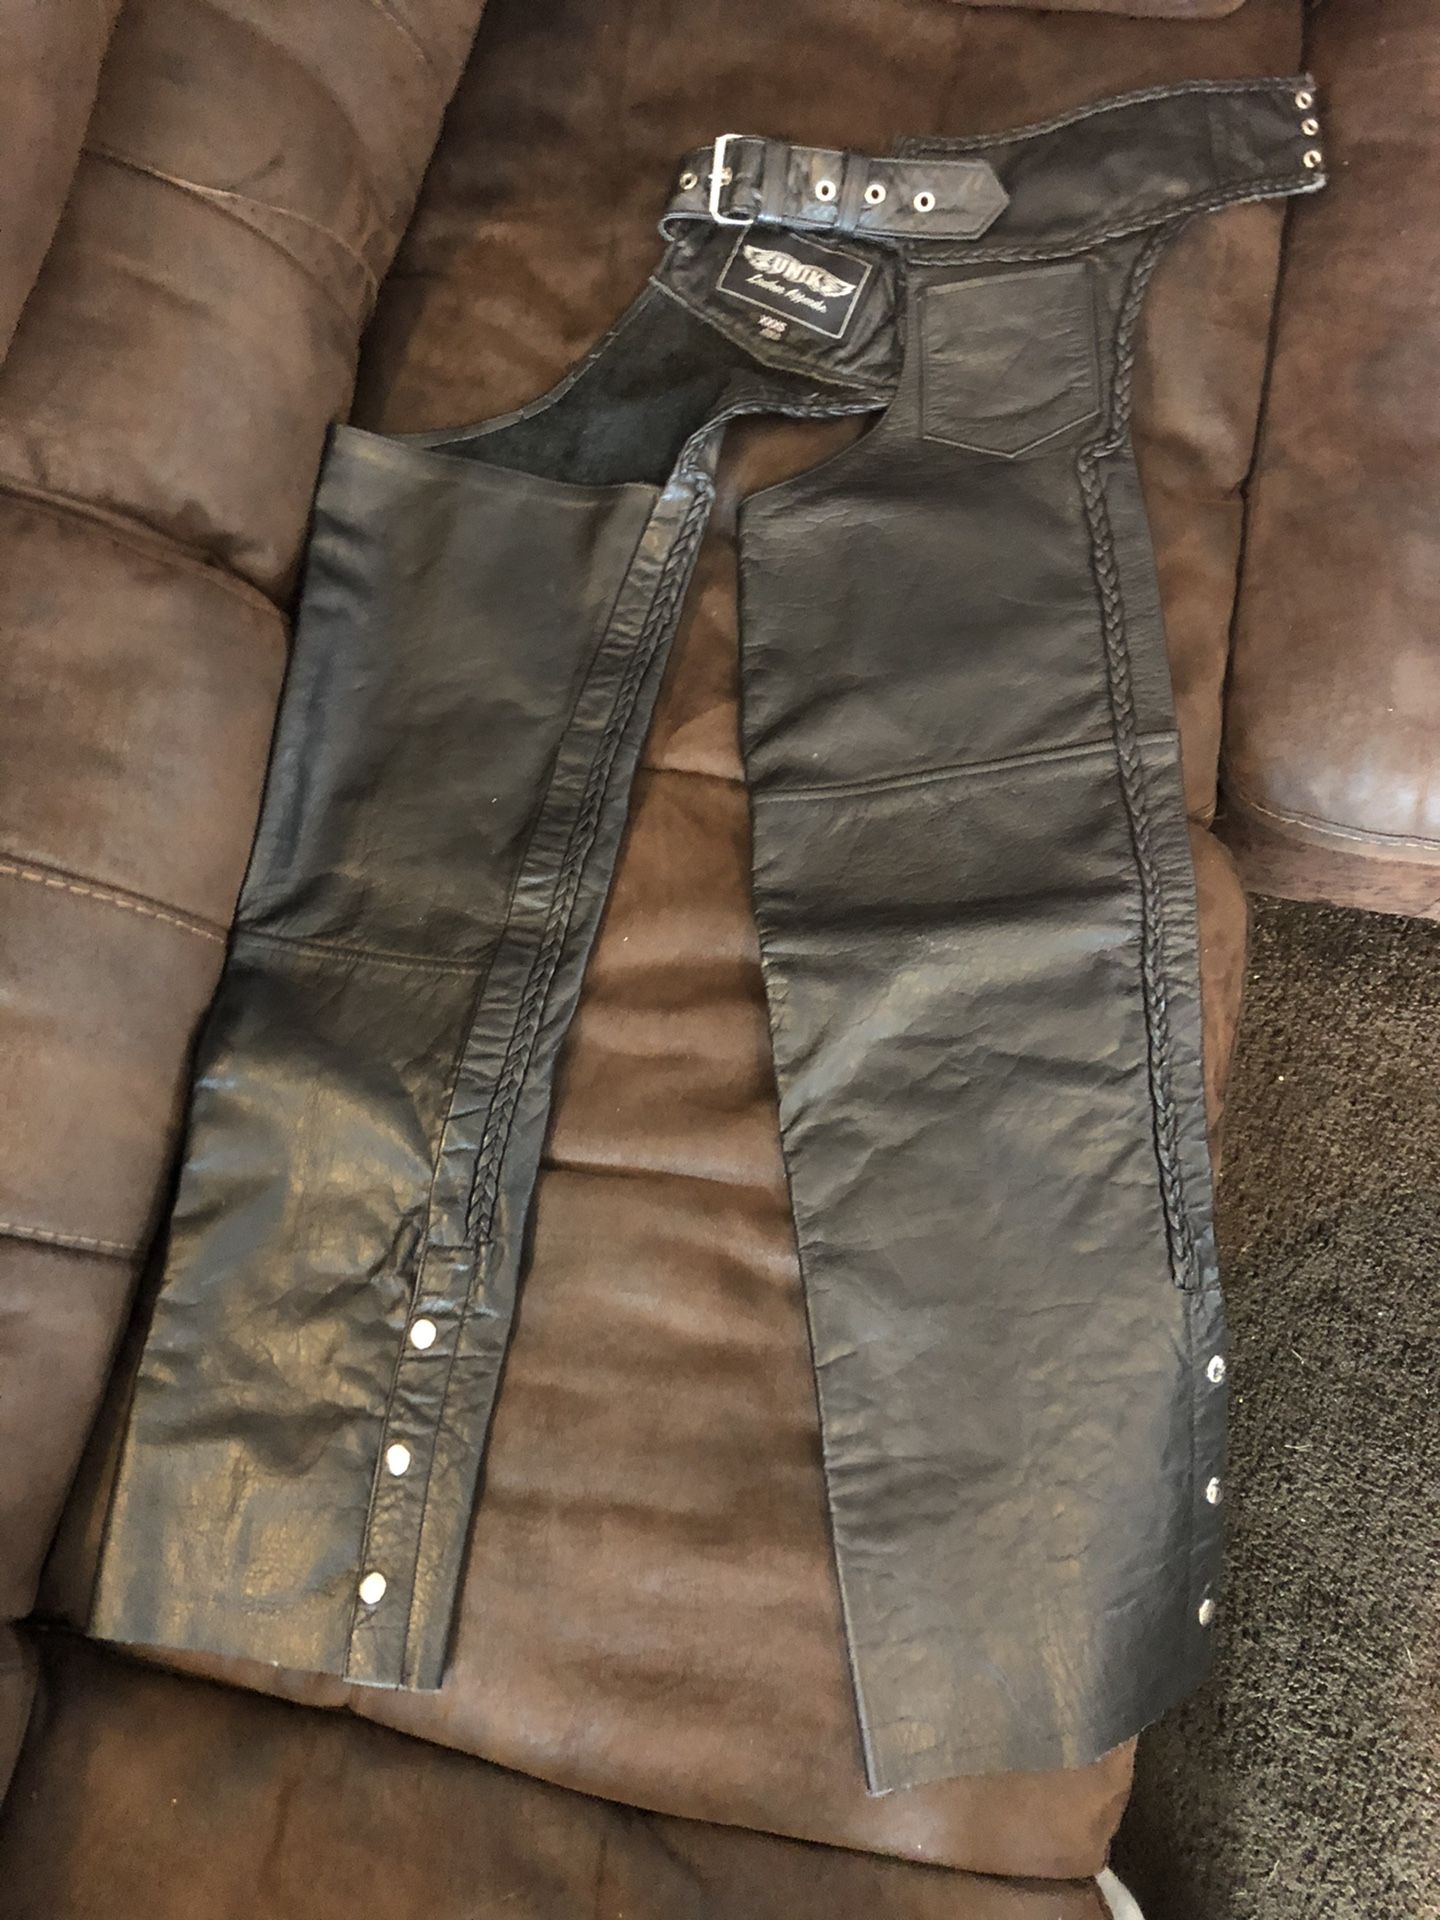 Woman’s leather motorcycle gear